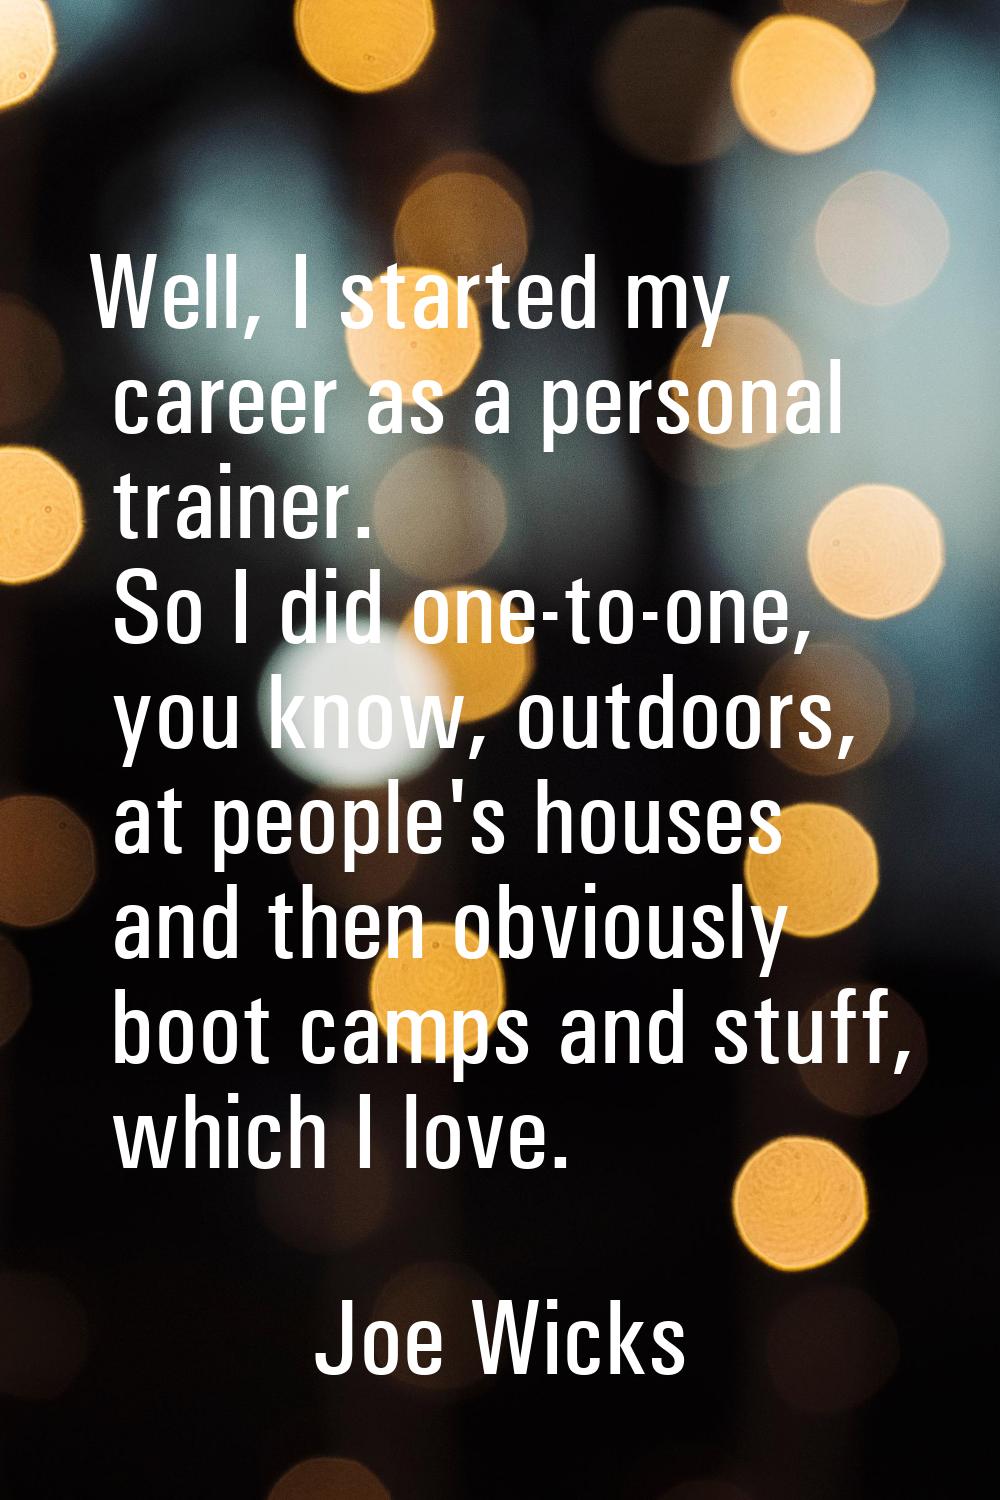 Well, I started my career as a personal trainer. So I did one-to-one, you know, outdoors, at people